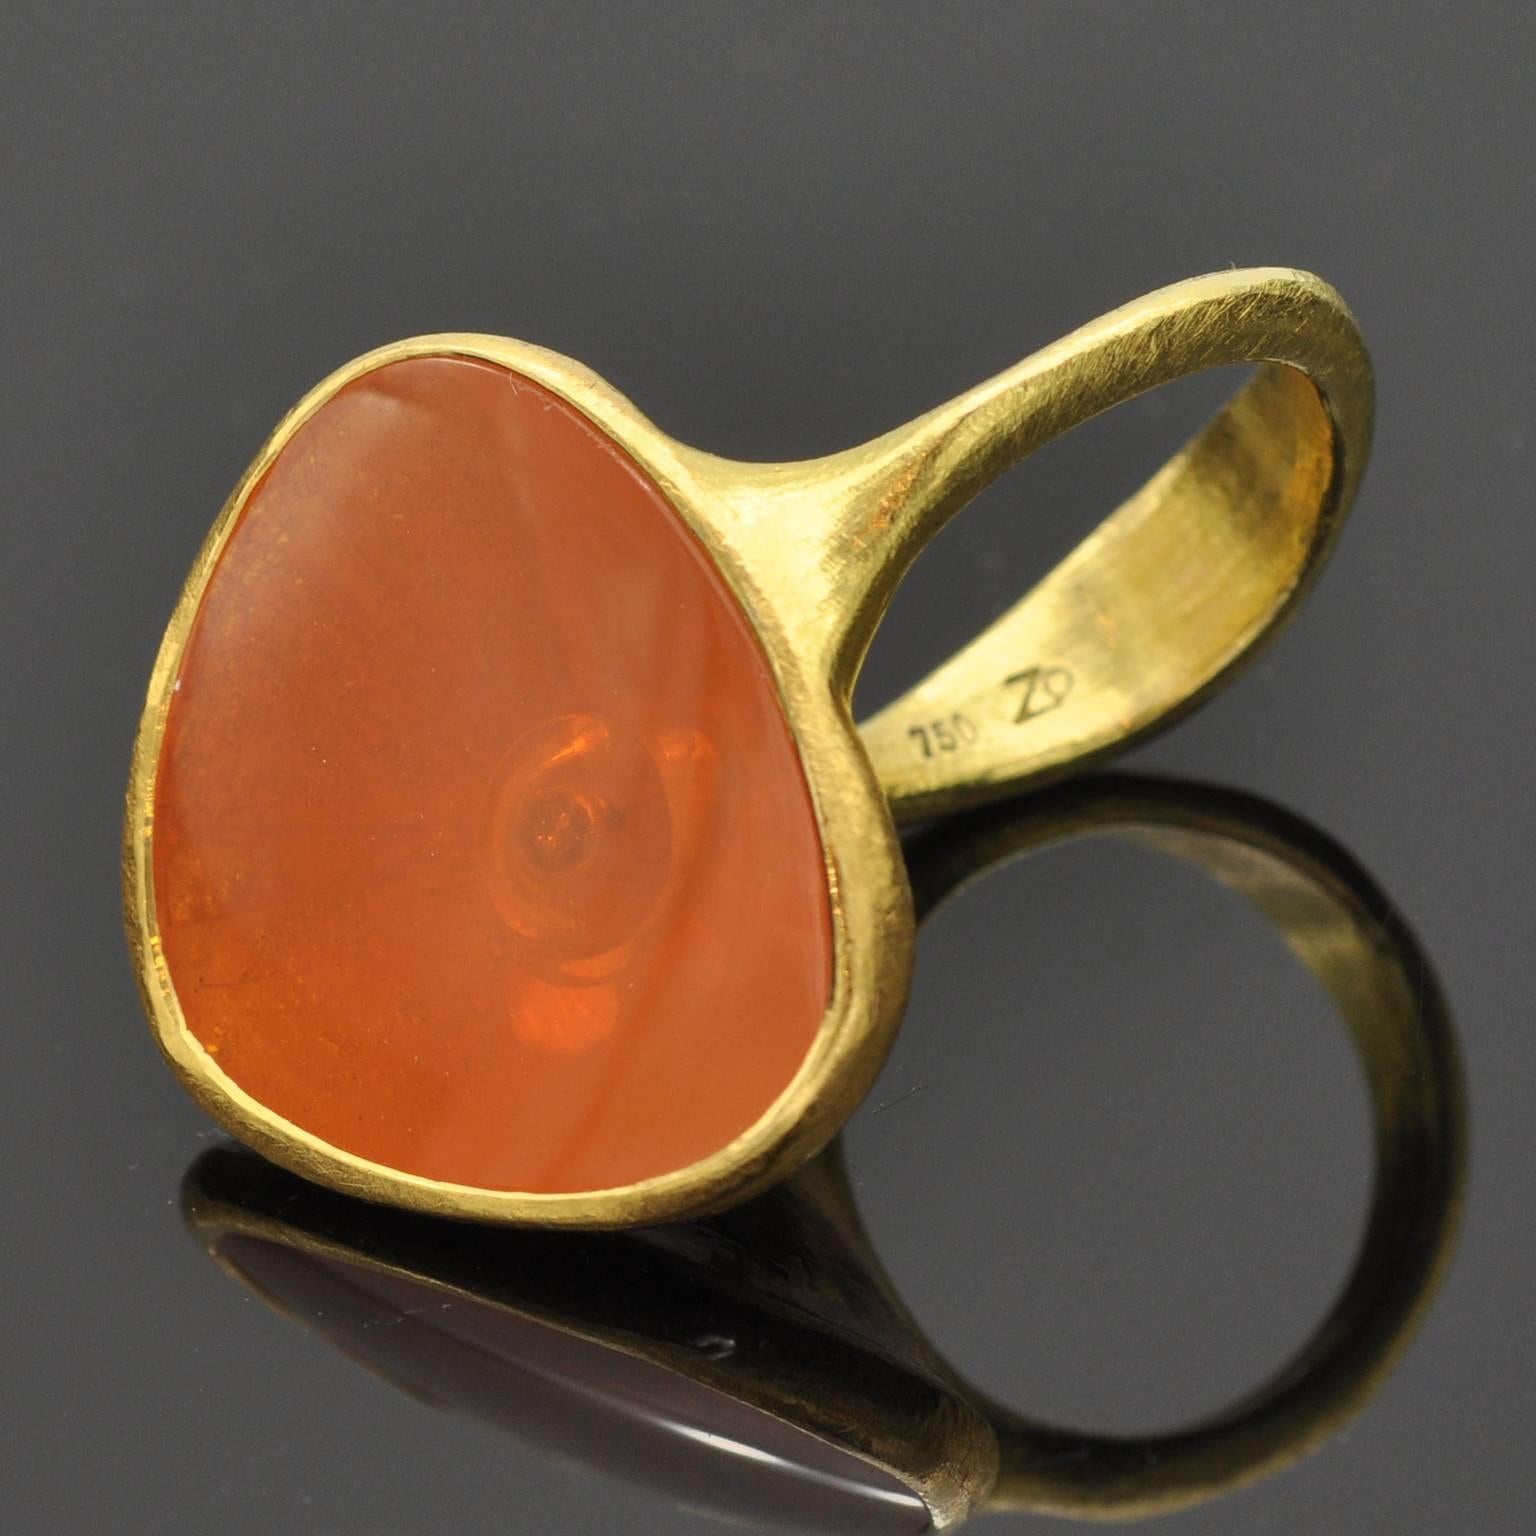 This unique modernist ring seems to get its ethnic inspiration from antique times. A besel set fire opal (16,67 carat ) and beneath it a diamond (0.06 ct) . The ring itself is 18 KT gold.  The opal is nested between two fingers thanks to The sensual